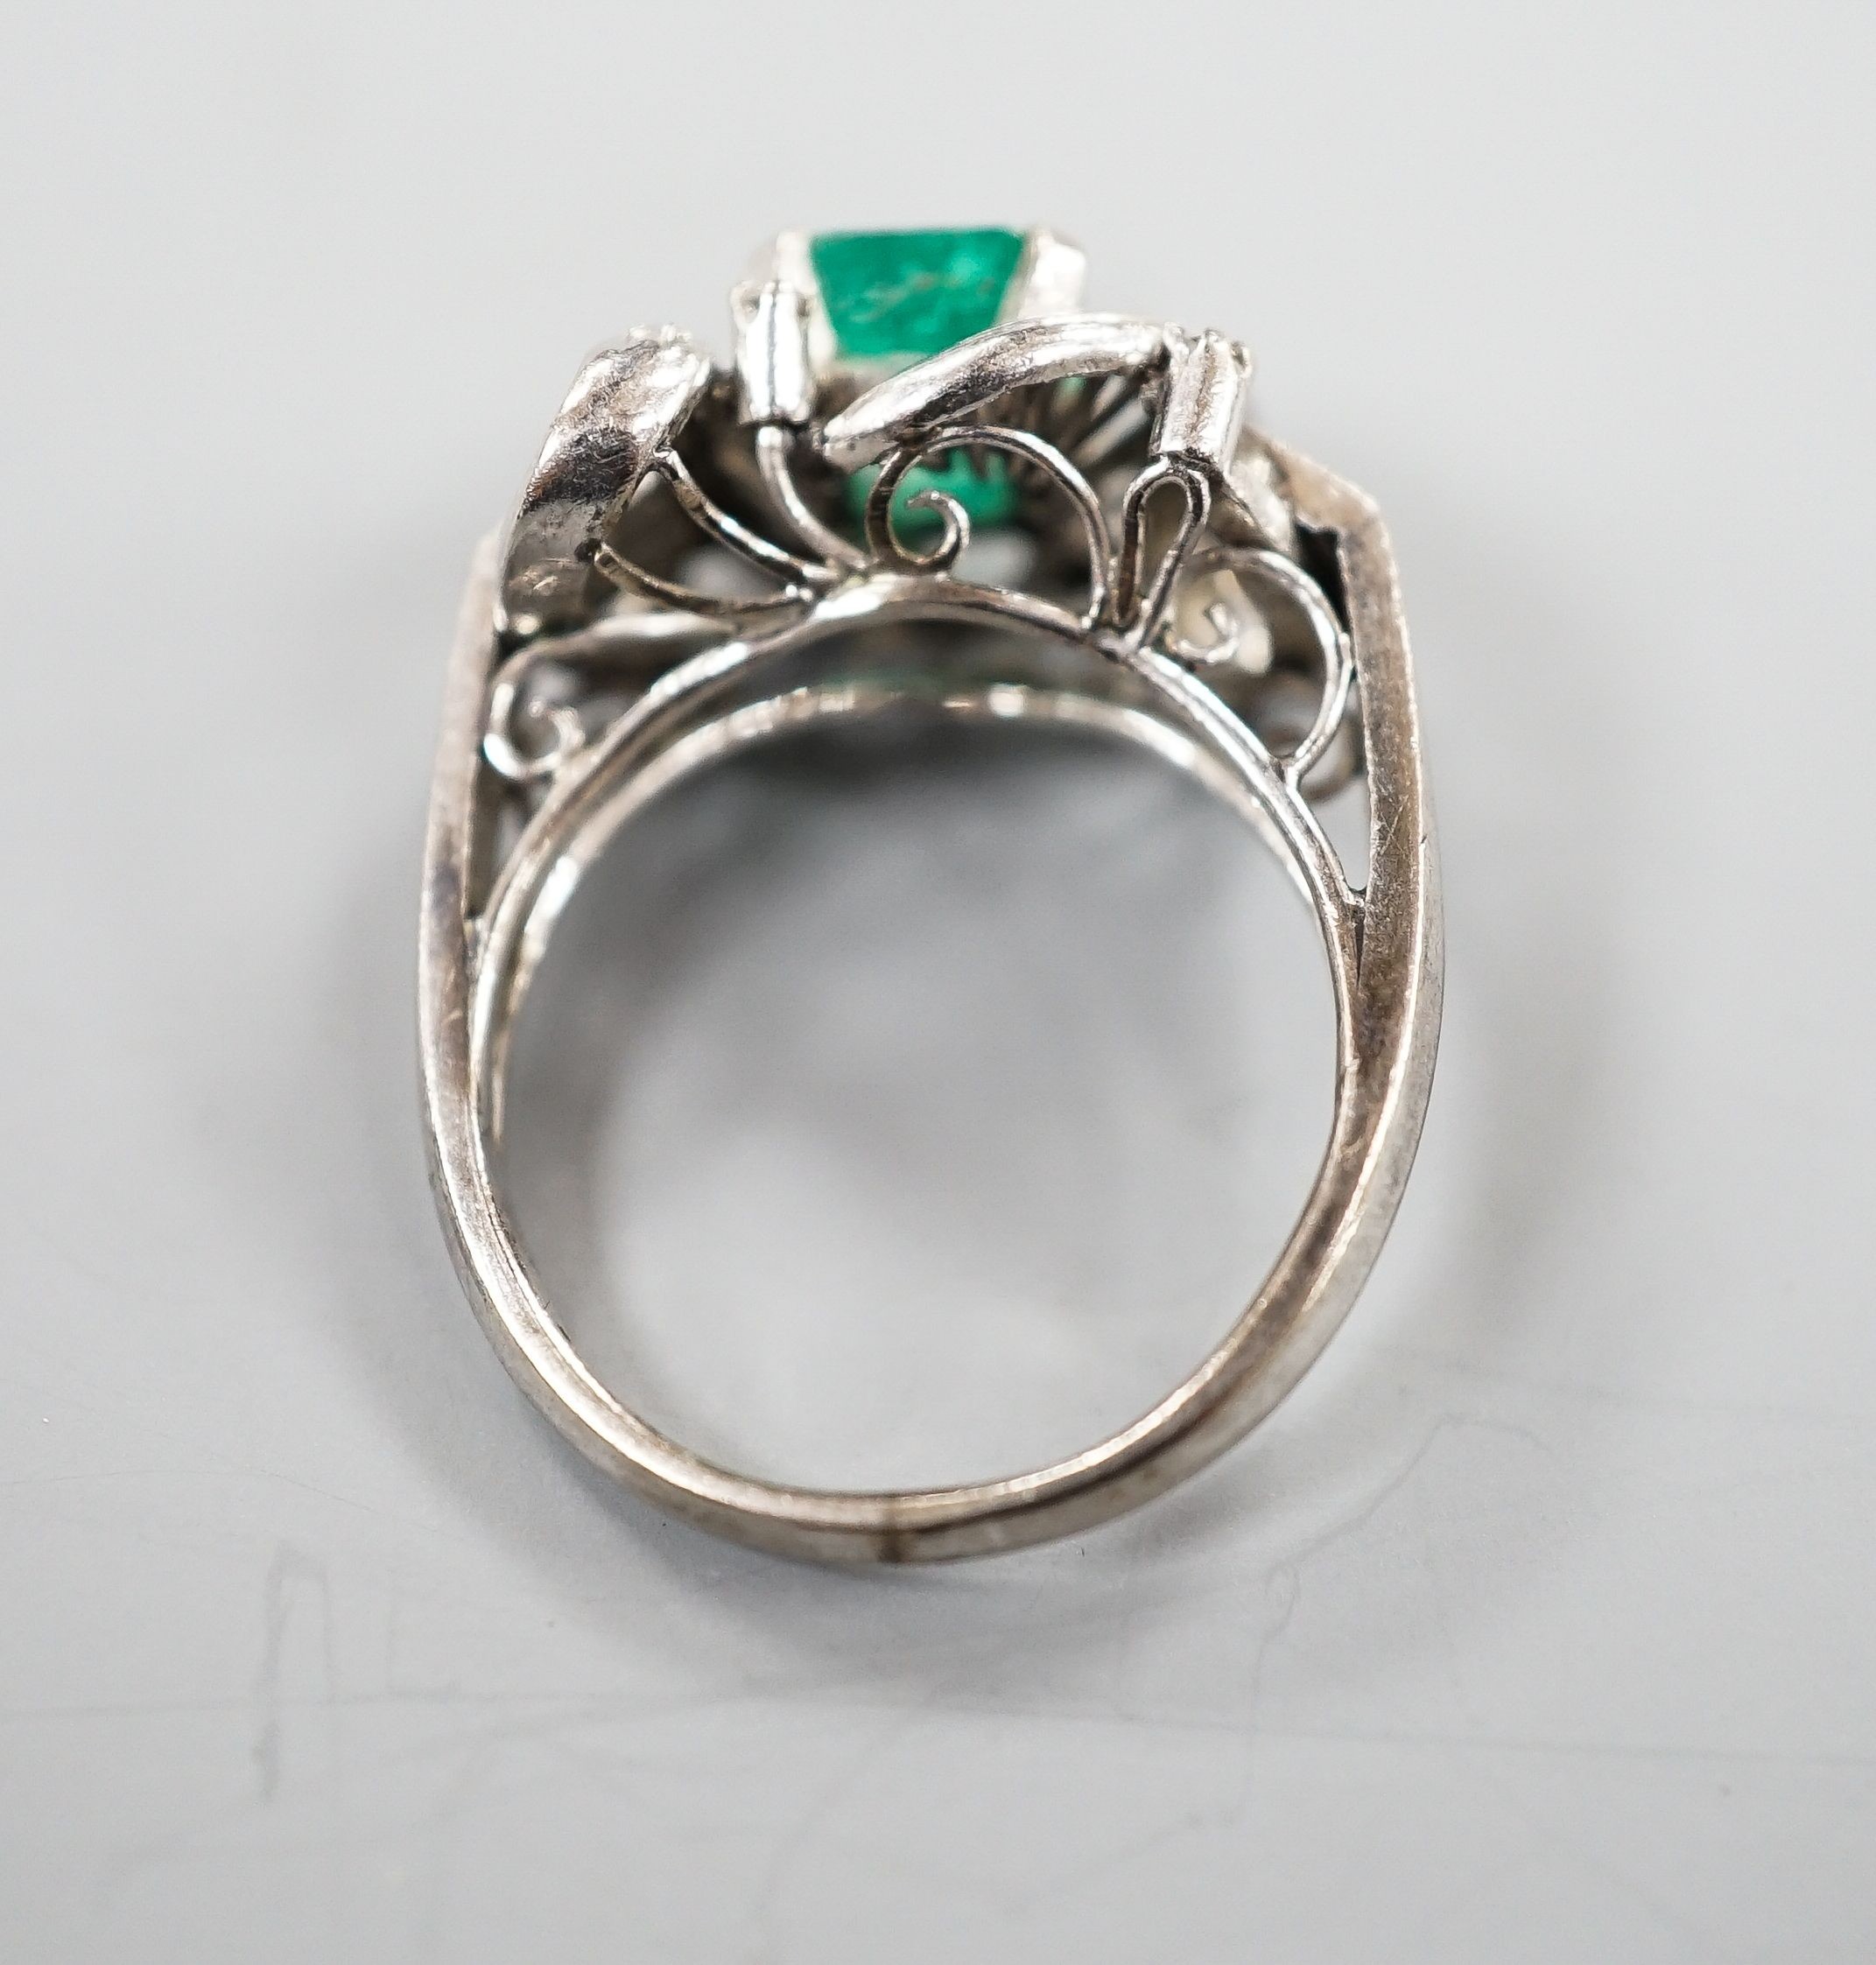 A modern 14k white metal and single stone emerald ring, with diamond chip set scroll setting, size K/L, gross weight 4.5 grams.